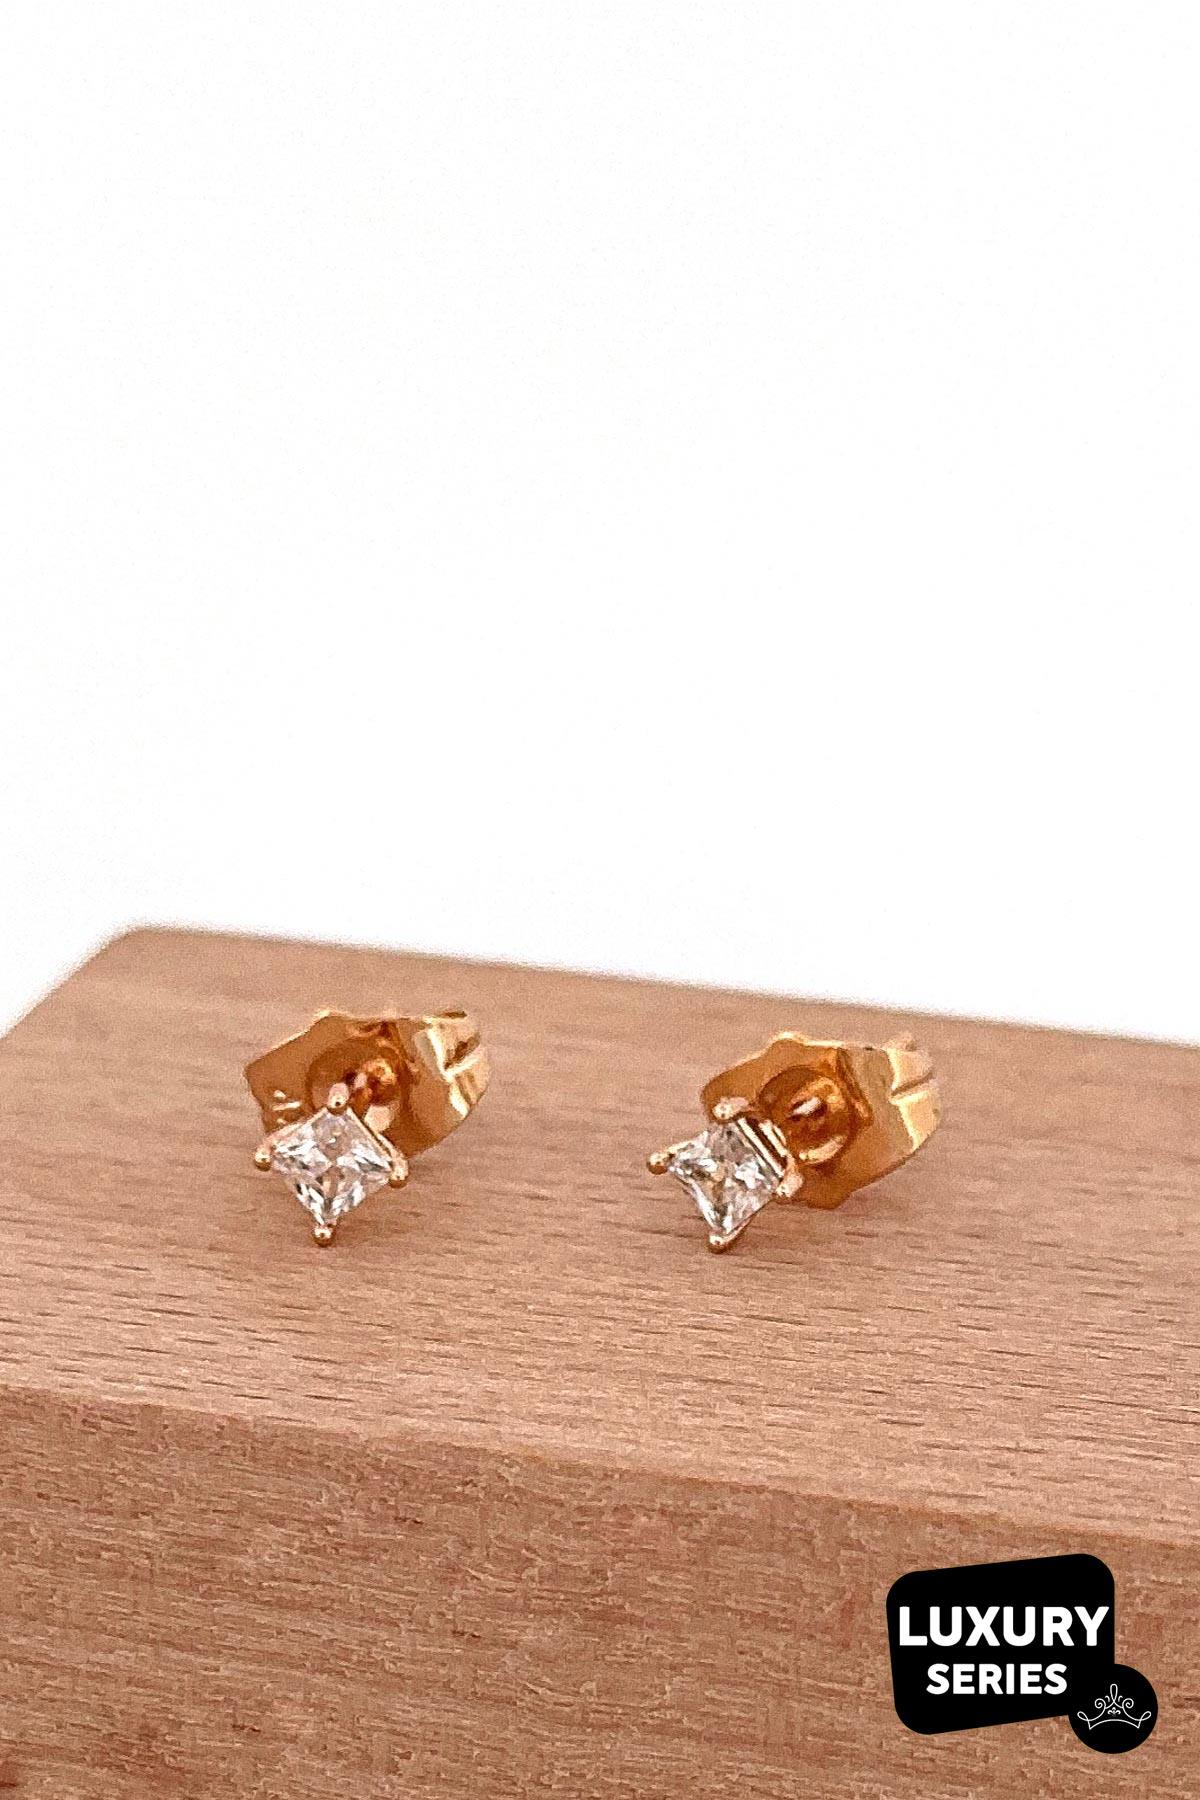 Luxury Gold Design Square Solitaire Earrings AKE5435